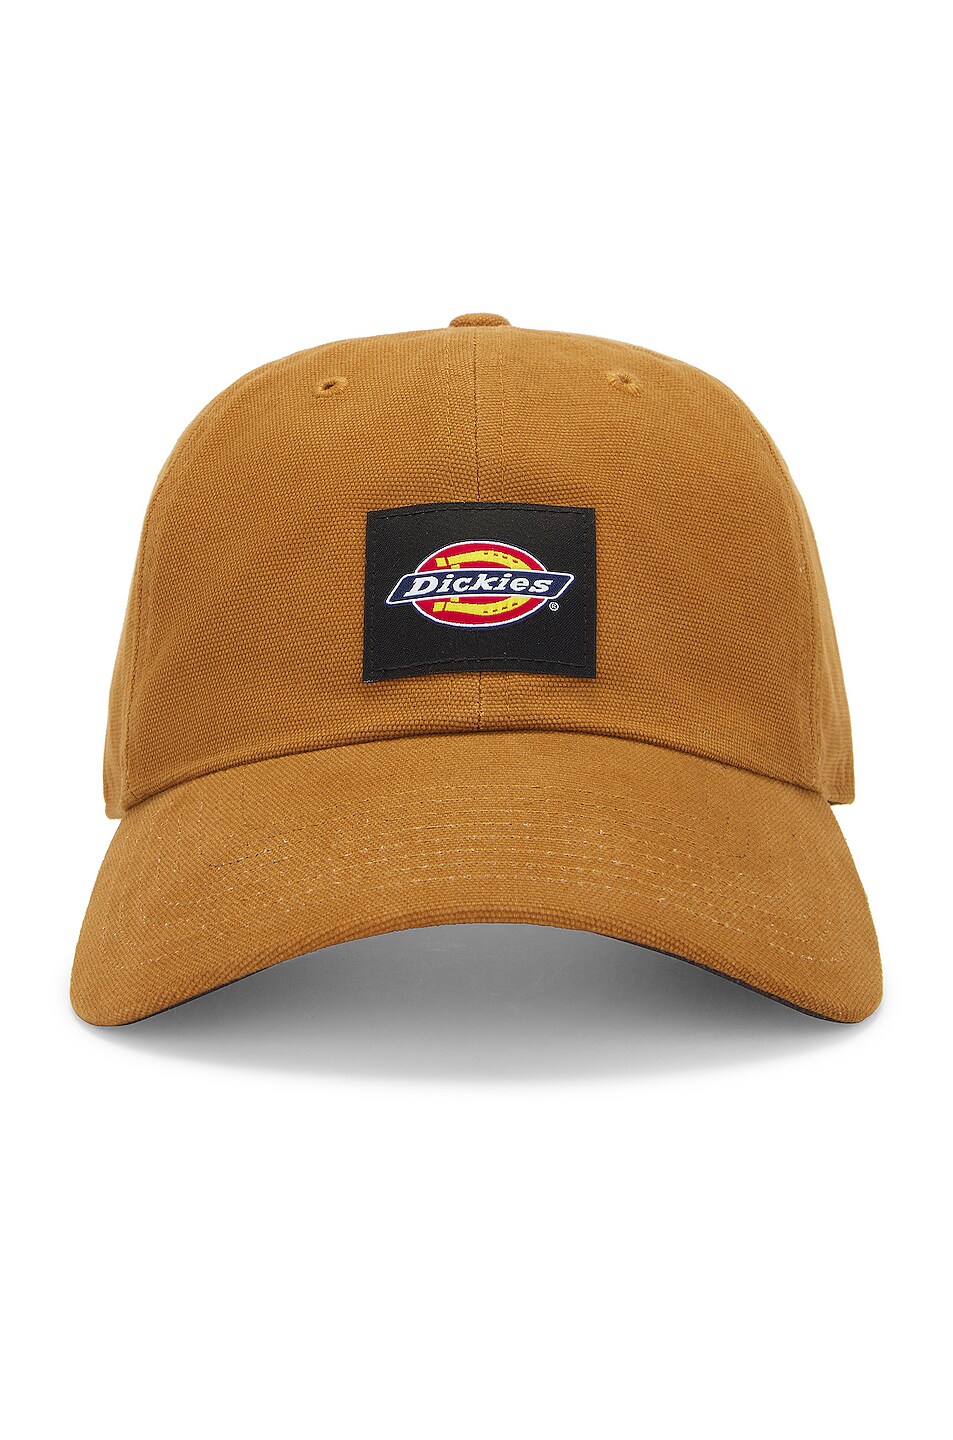 Washed Canvas Cap in Brown